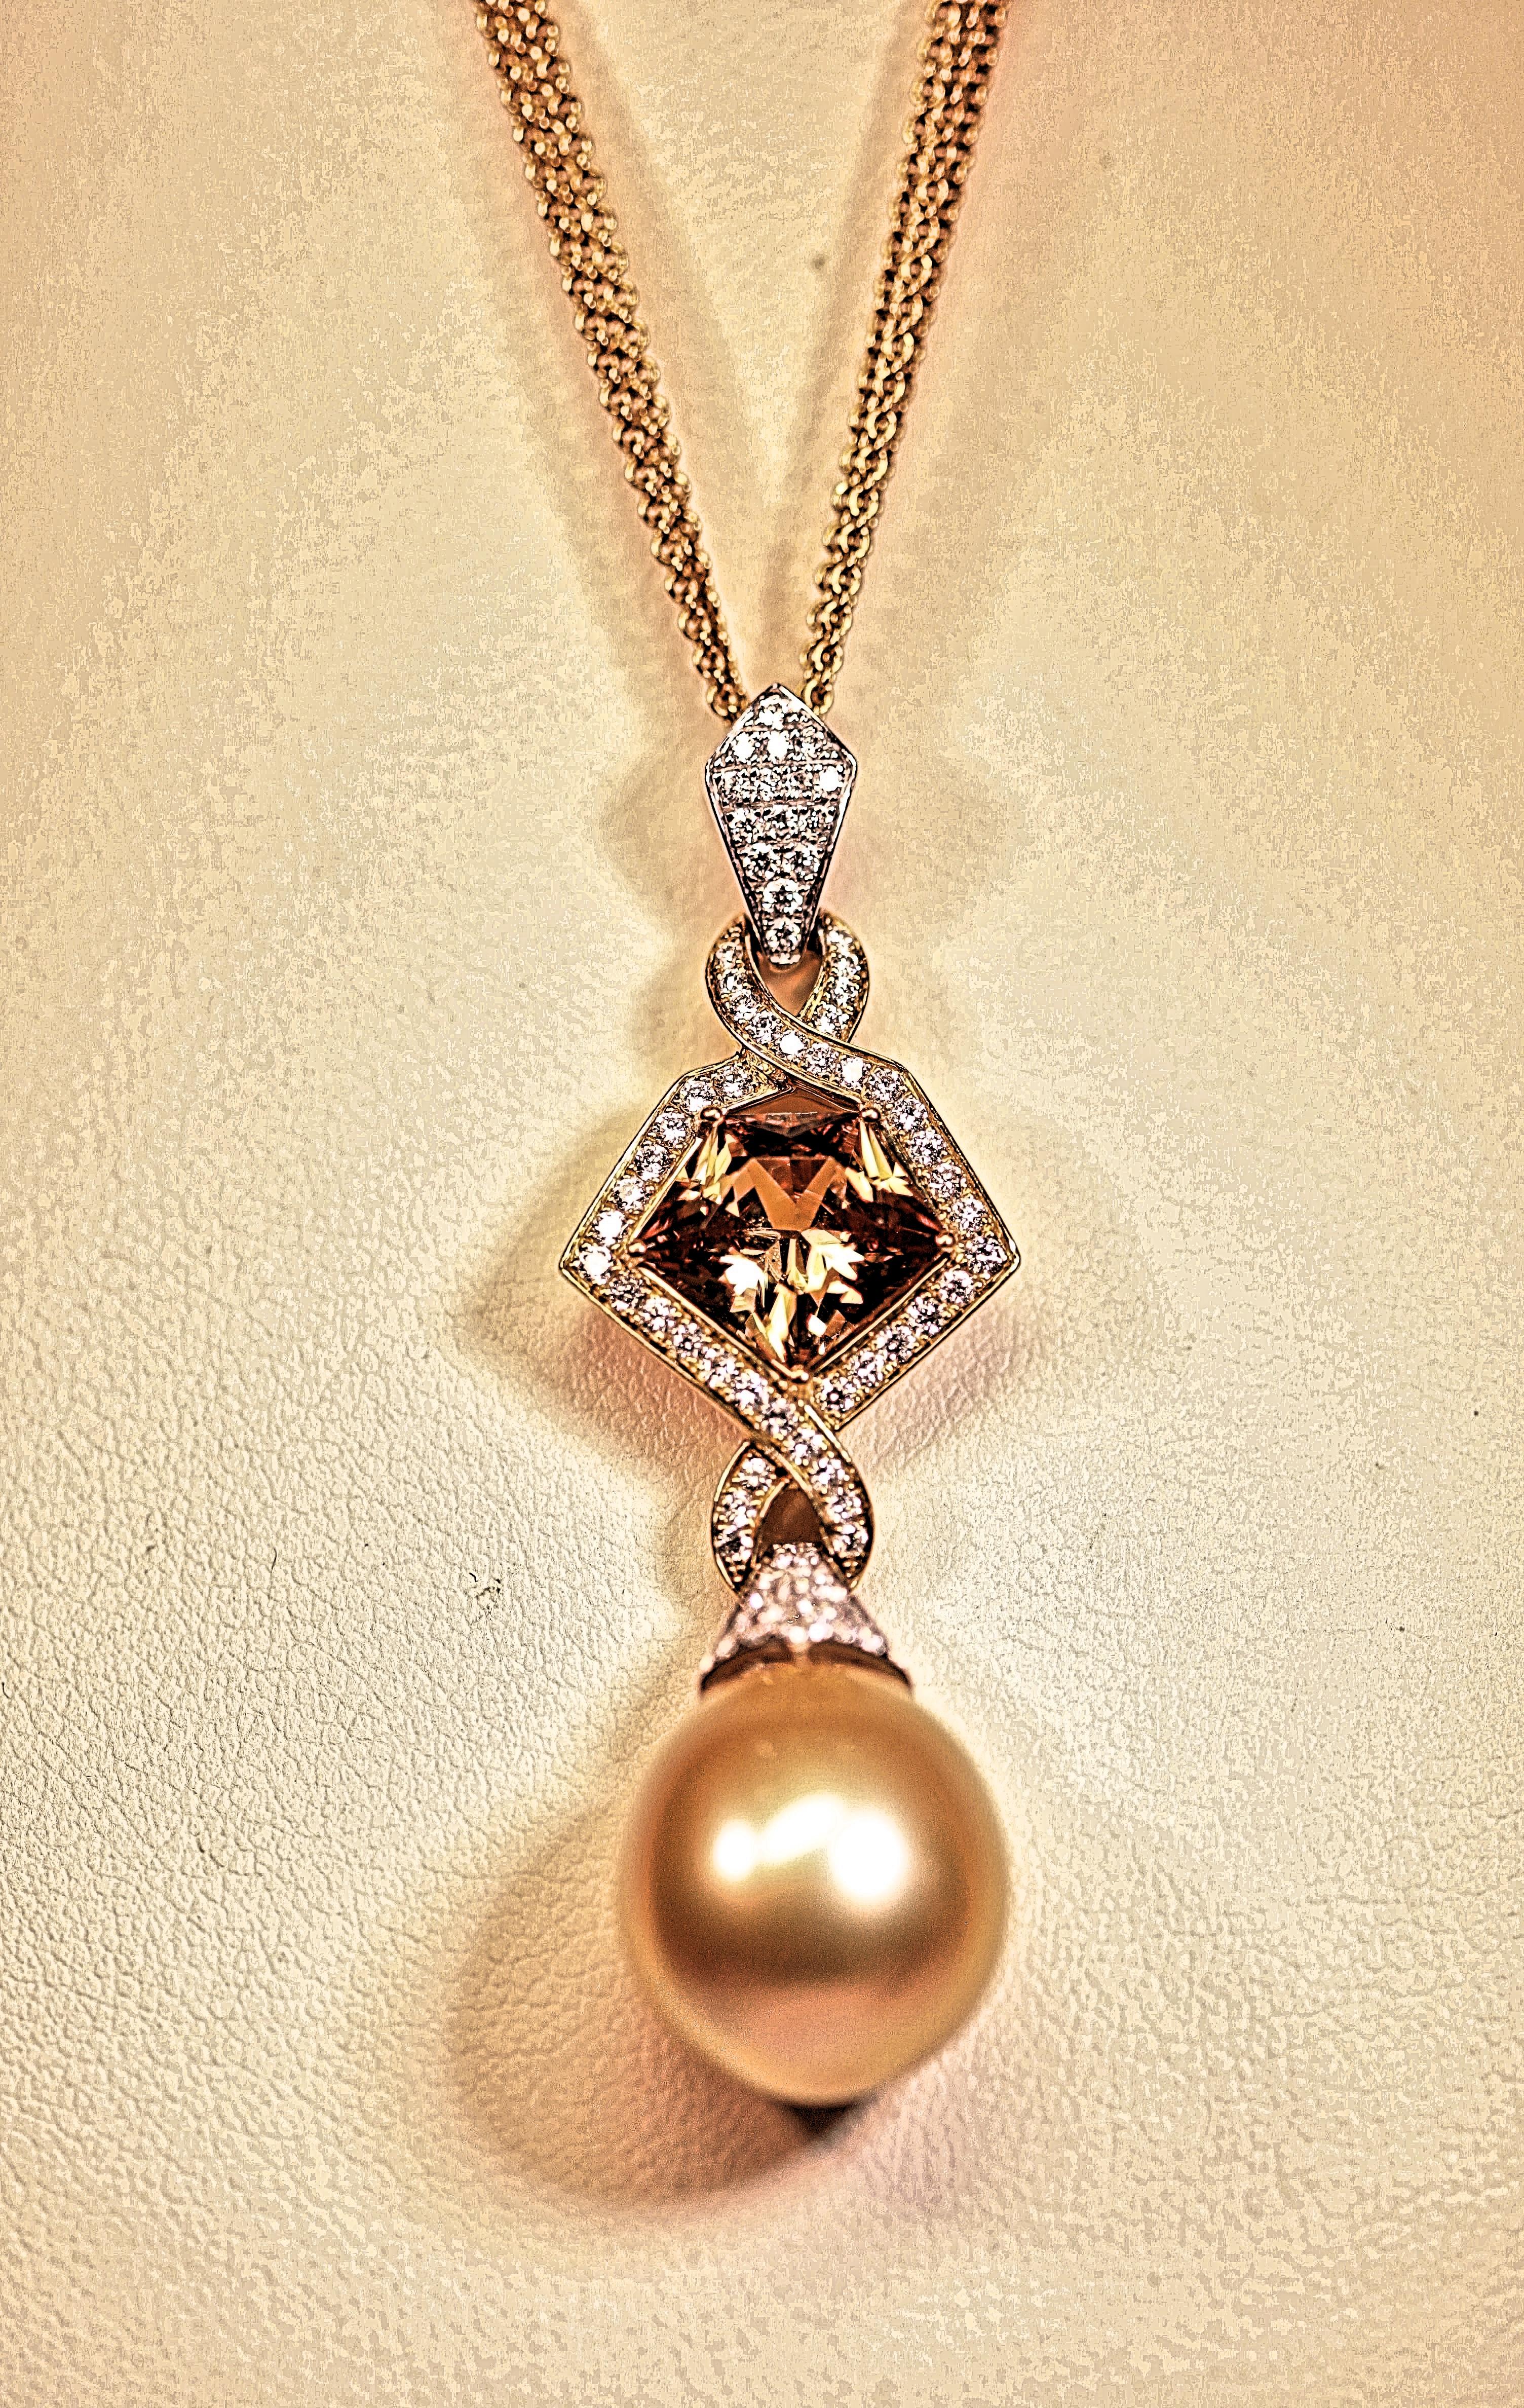 The pendant has a gorgeous golden South Sea pearl, diamonds and a golden fancy cut zircon. The South Sea golden pearl measures 15mm by 13mm. The pearl has excellent luster and minor blemishes. The pendant has one pentagon shaped golden zircon that